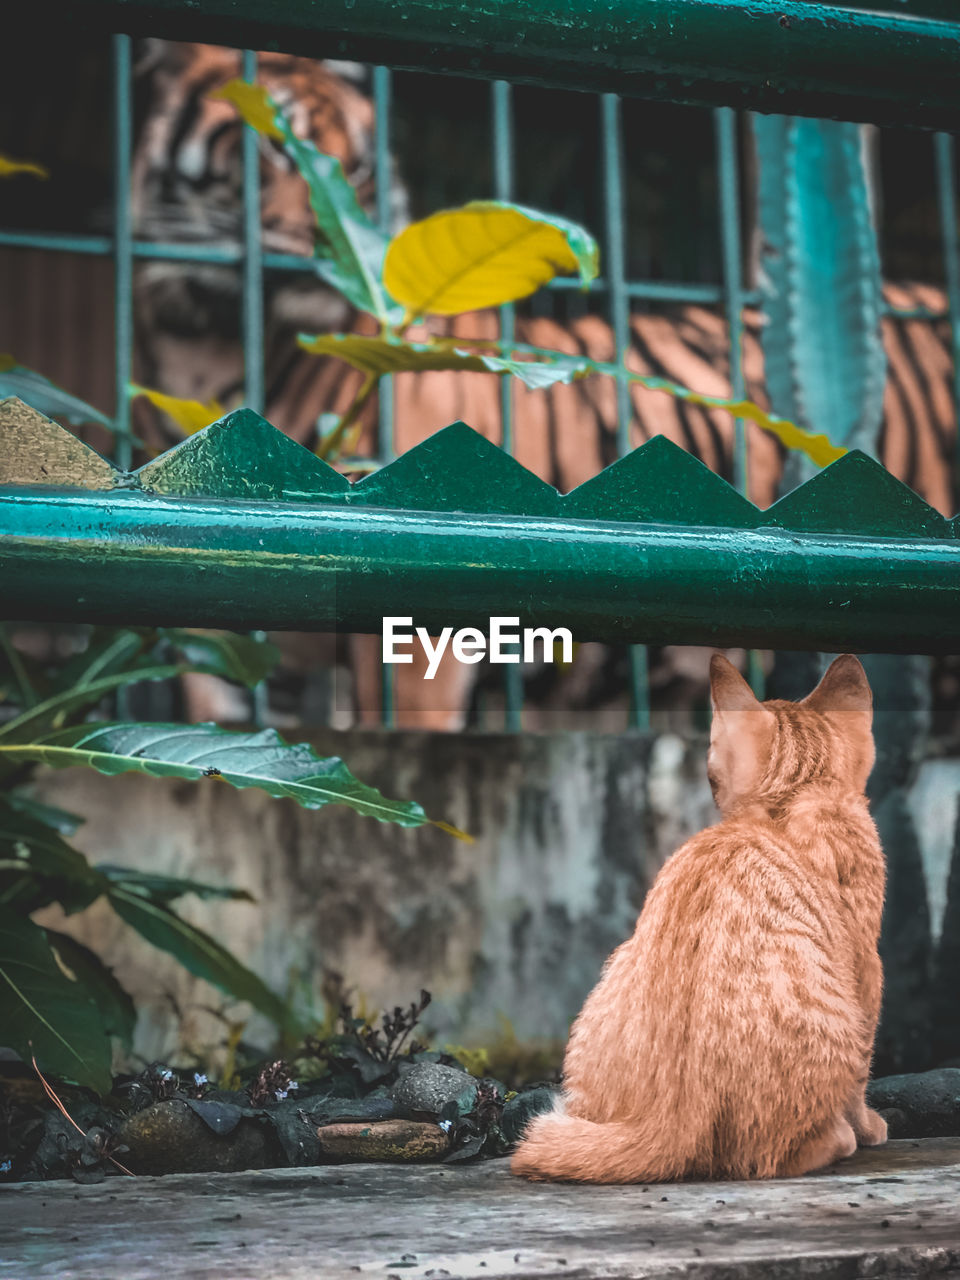 animal, animal themes, mammal, cat, one animal, pet, domestic animals, green, no people, zoo, animals in captivity, nature, animal wildlife, outdoors, day, focus on foreground, cage